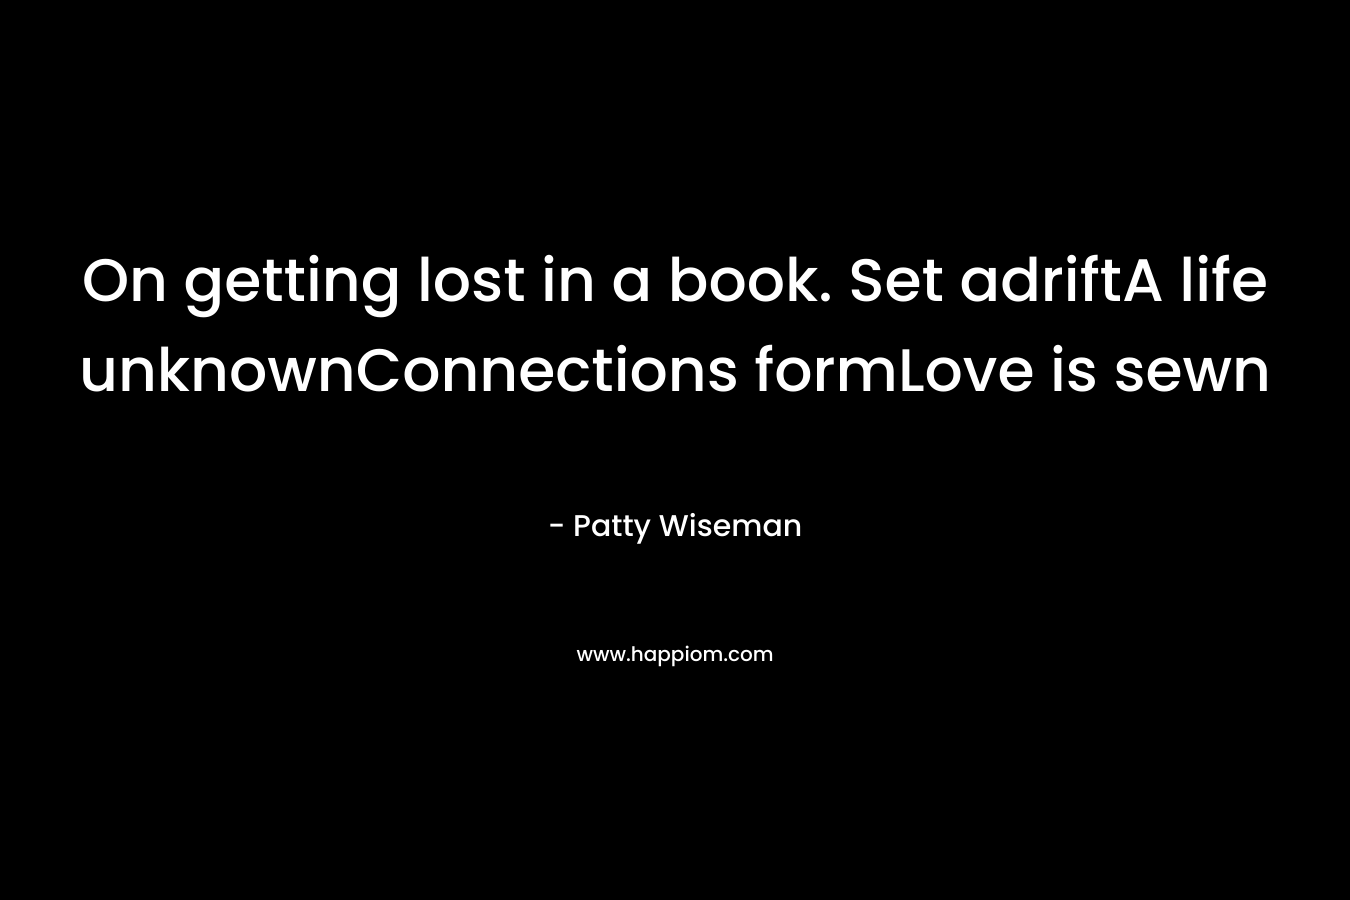 On getting lost in a book. Set adriftA life unknownConnections formLove is sewn